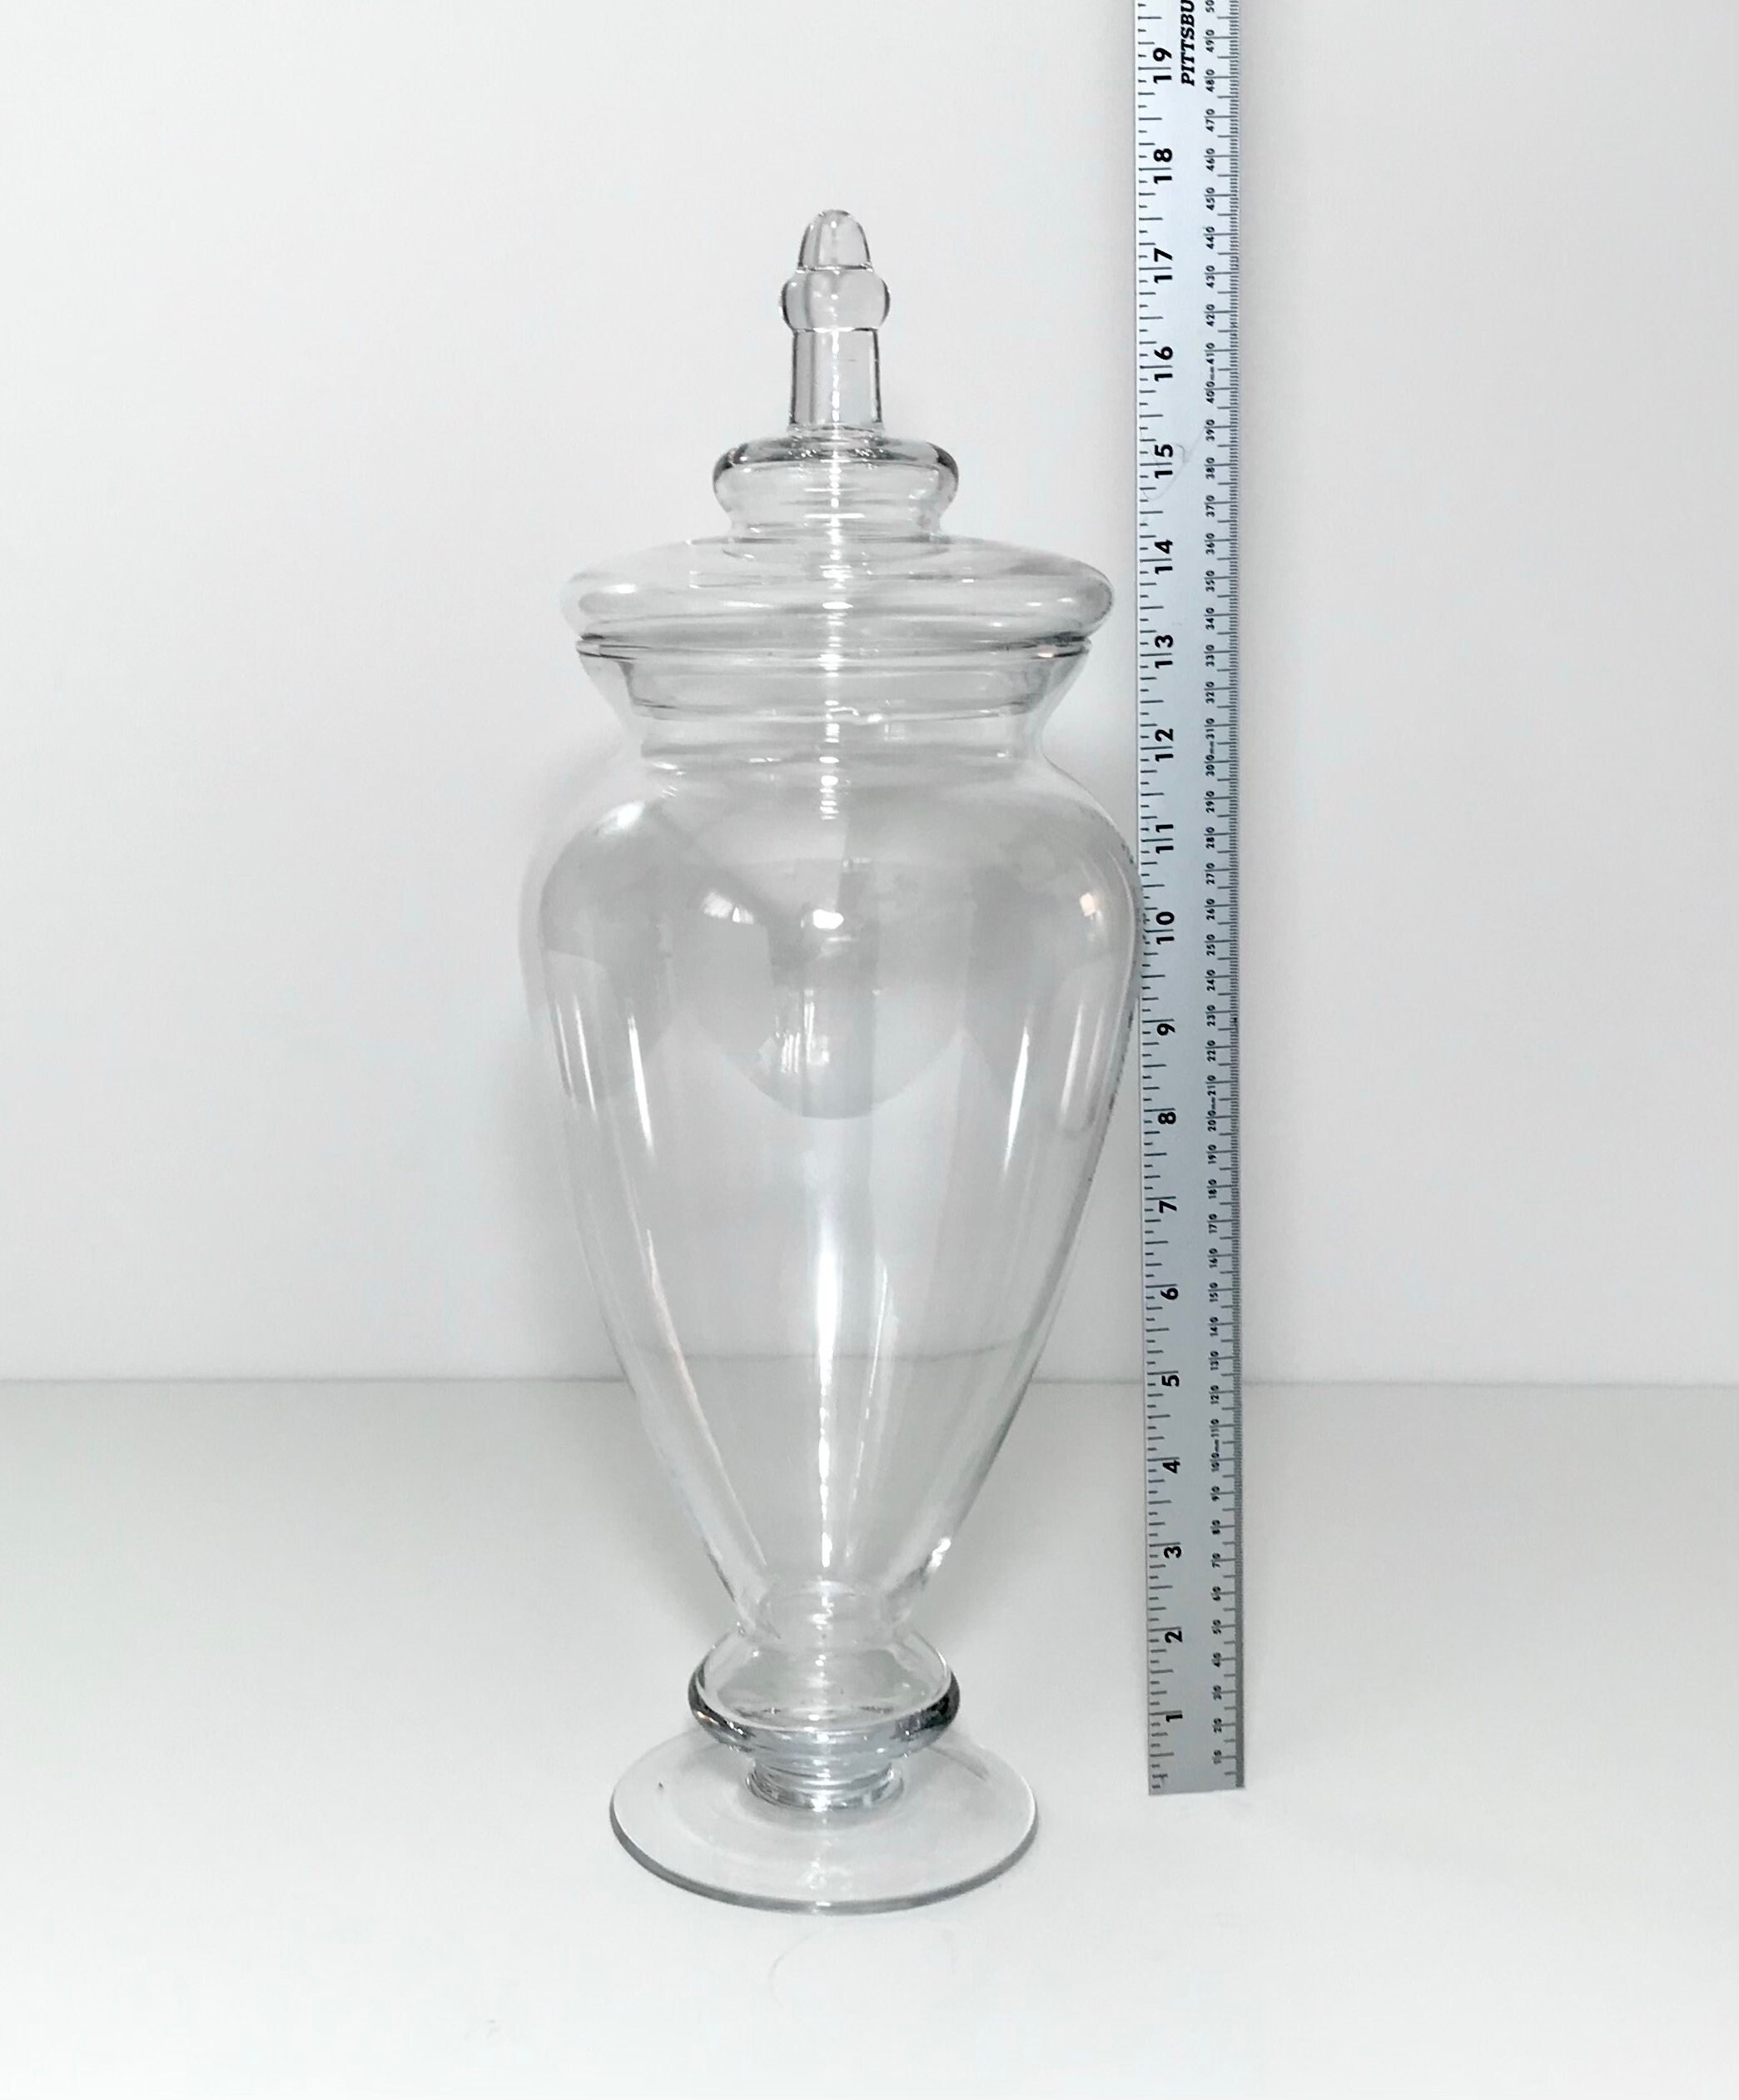 20 oz. Thick Elevation Apothecary Jars with Flat Glass Lids per dozen